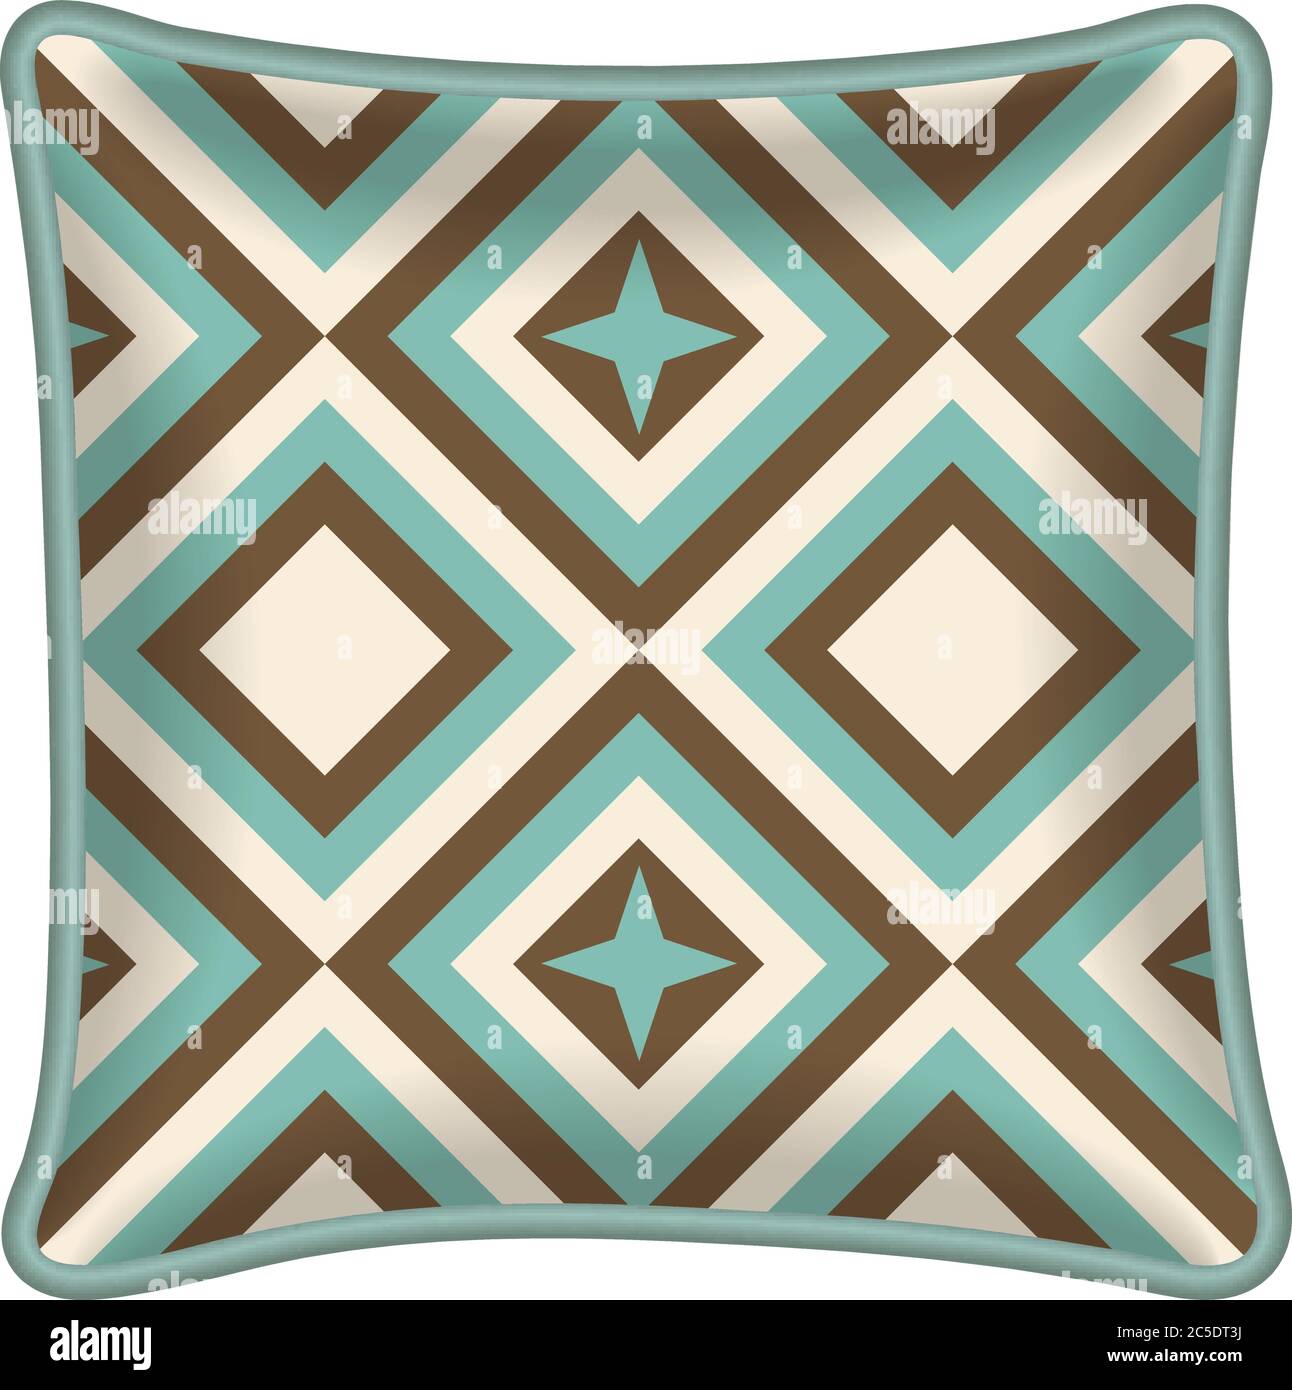 Interior design element: Decorative pillow with patterned pillowcase (abstract geometric pattern in mint and brown colors). Isolated on white. Vector Stock Vector